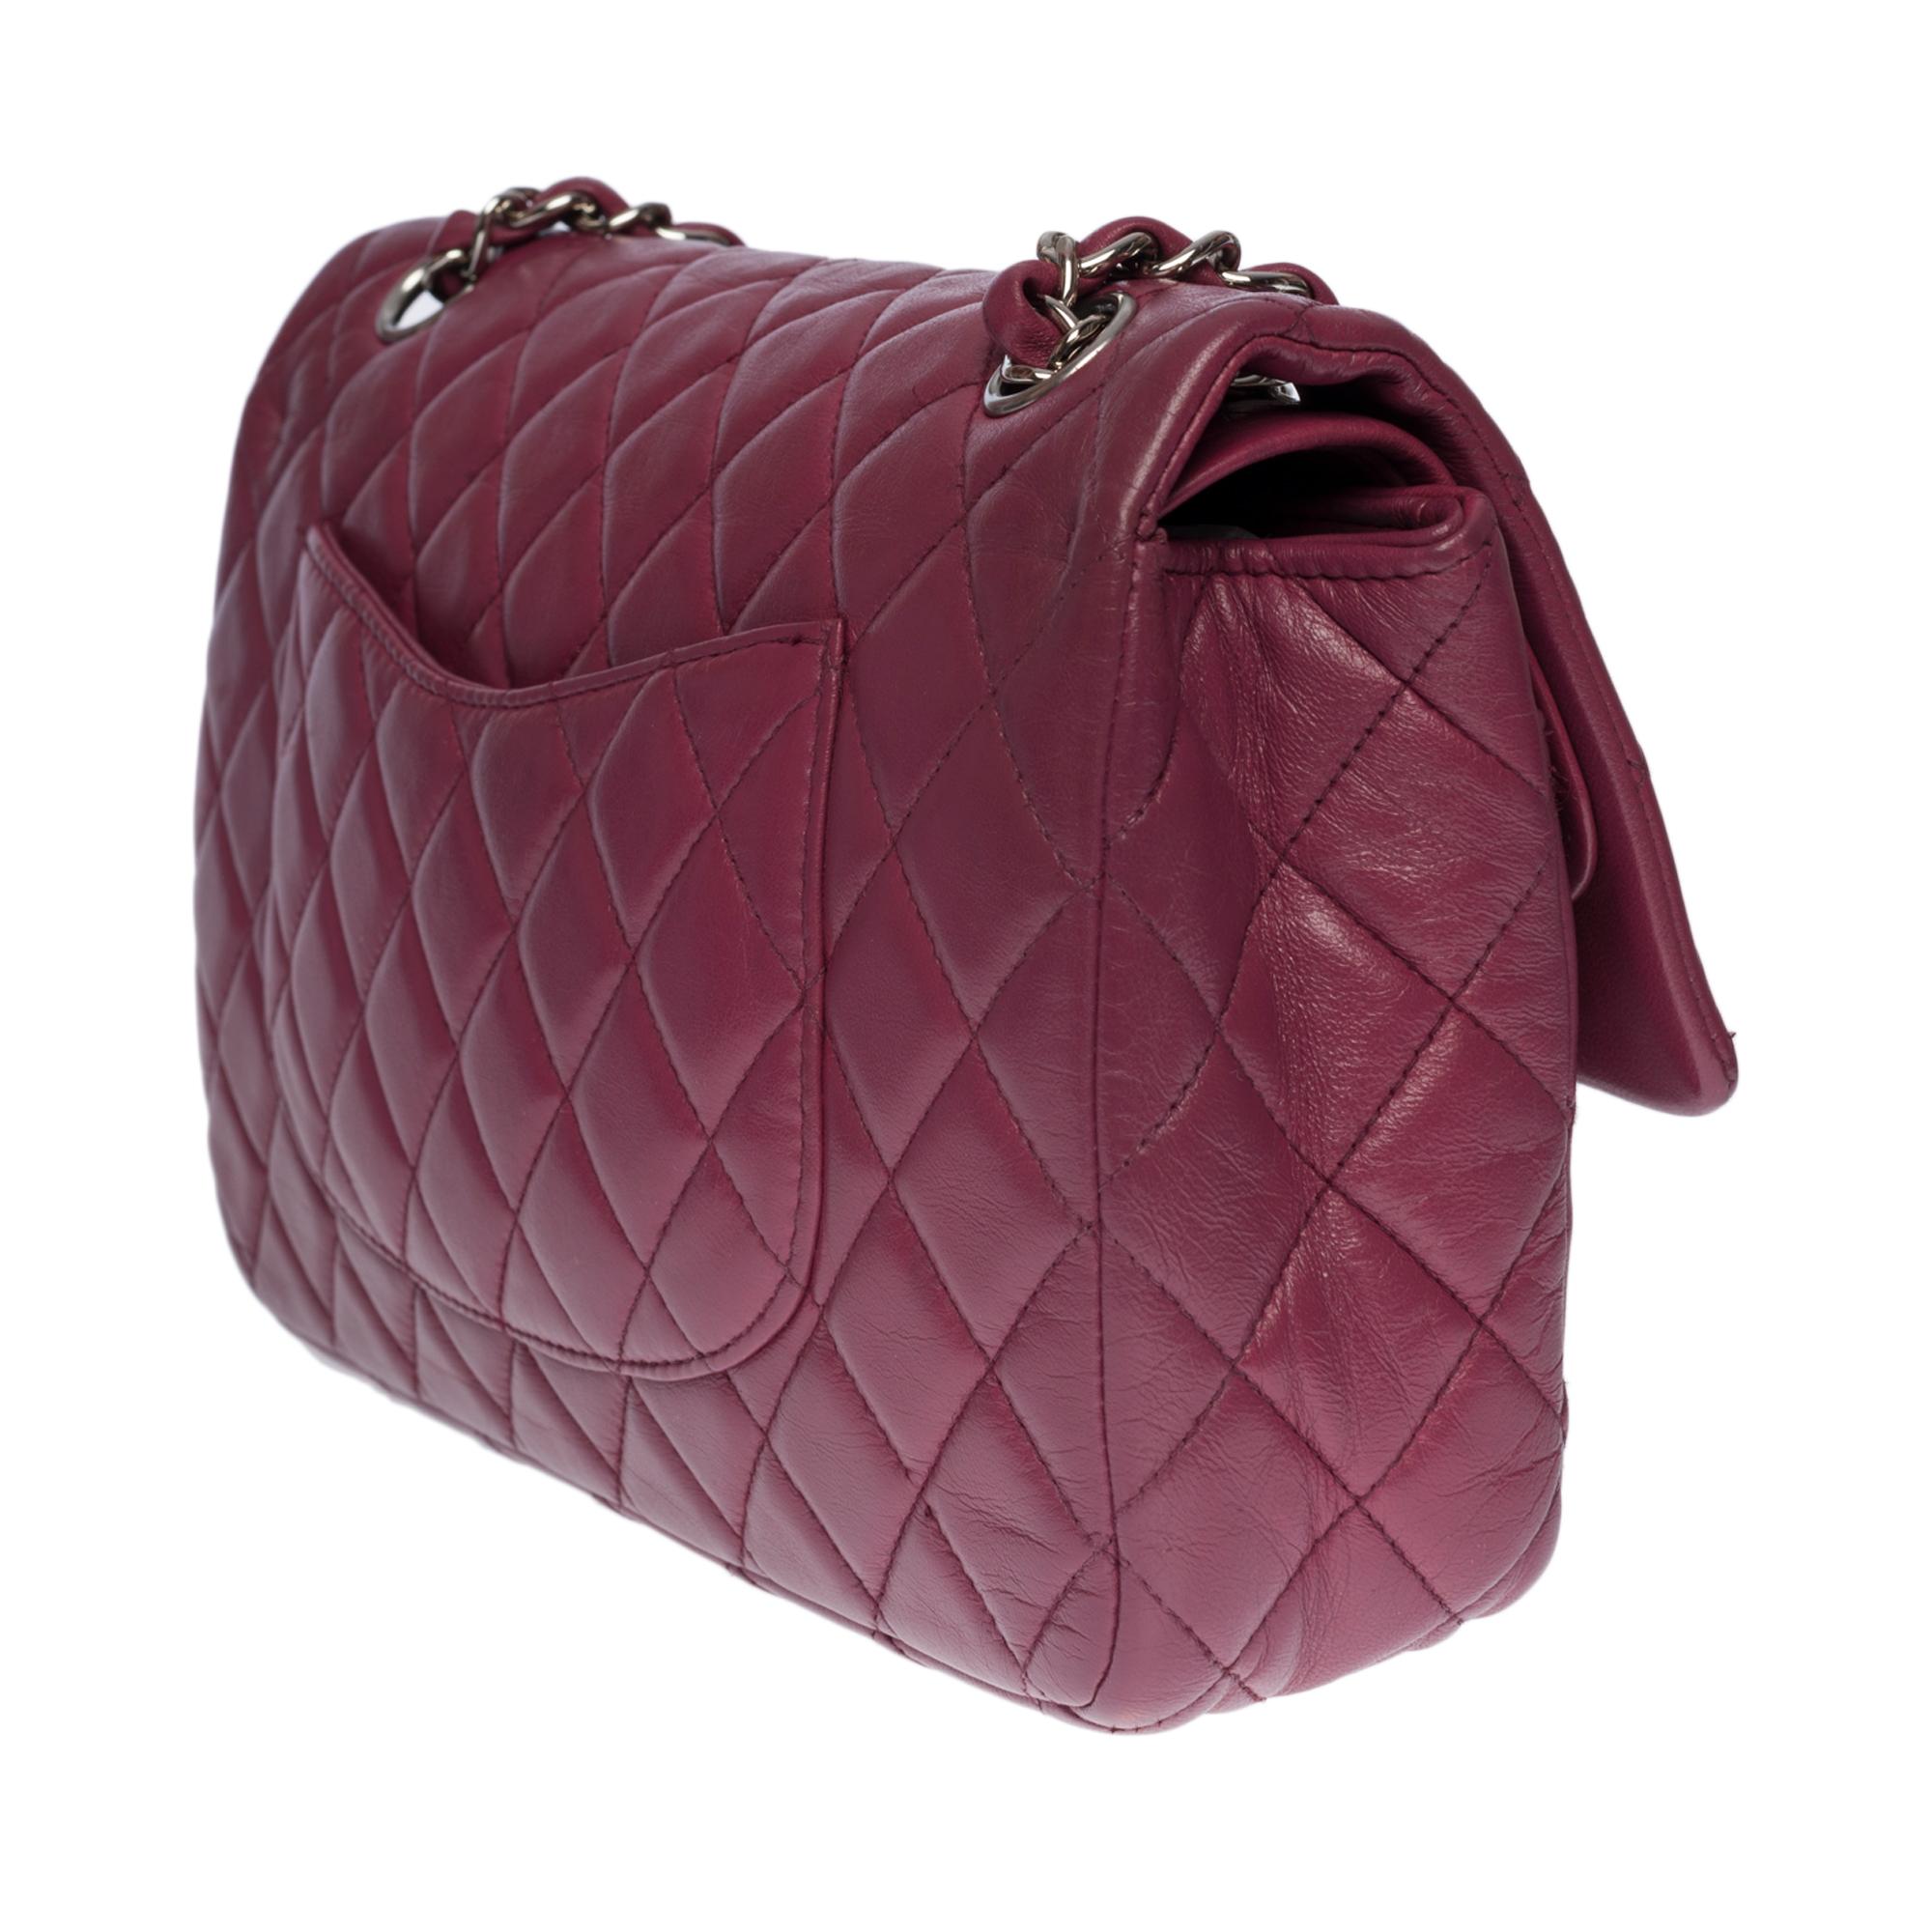 Brown Chanel Timeless/Classic double Flap shoulder bag in Mauve quilted lambskin, SHW